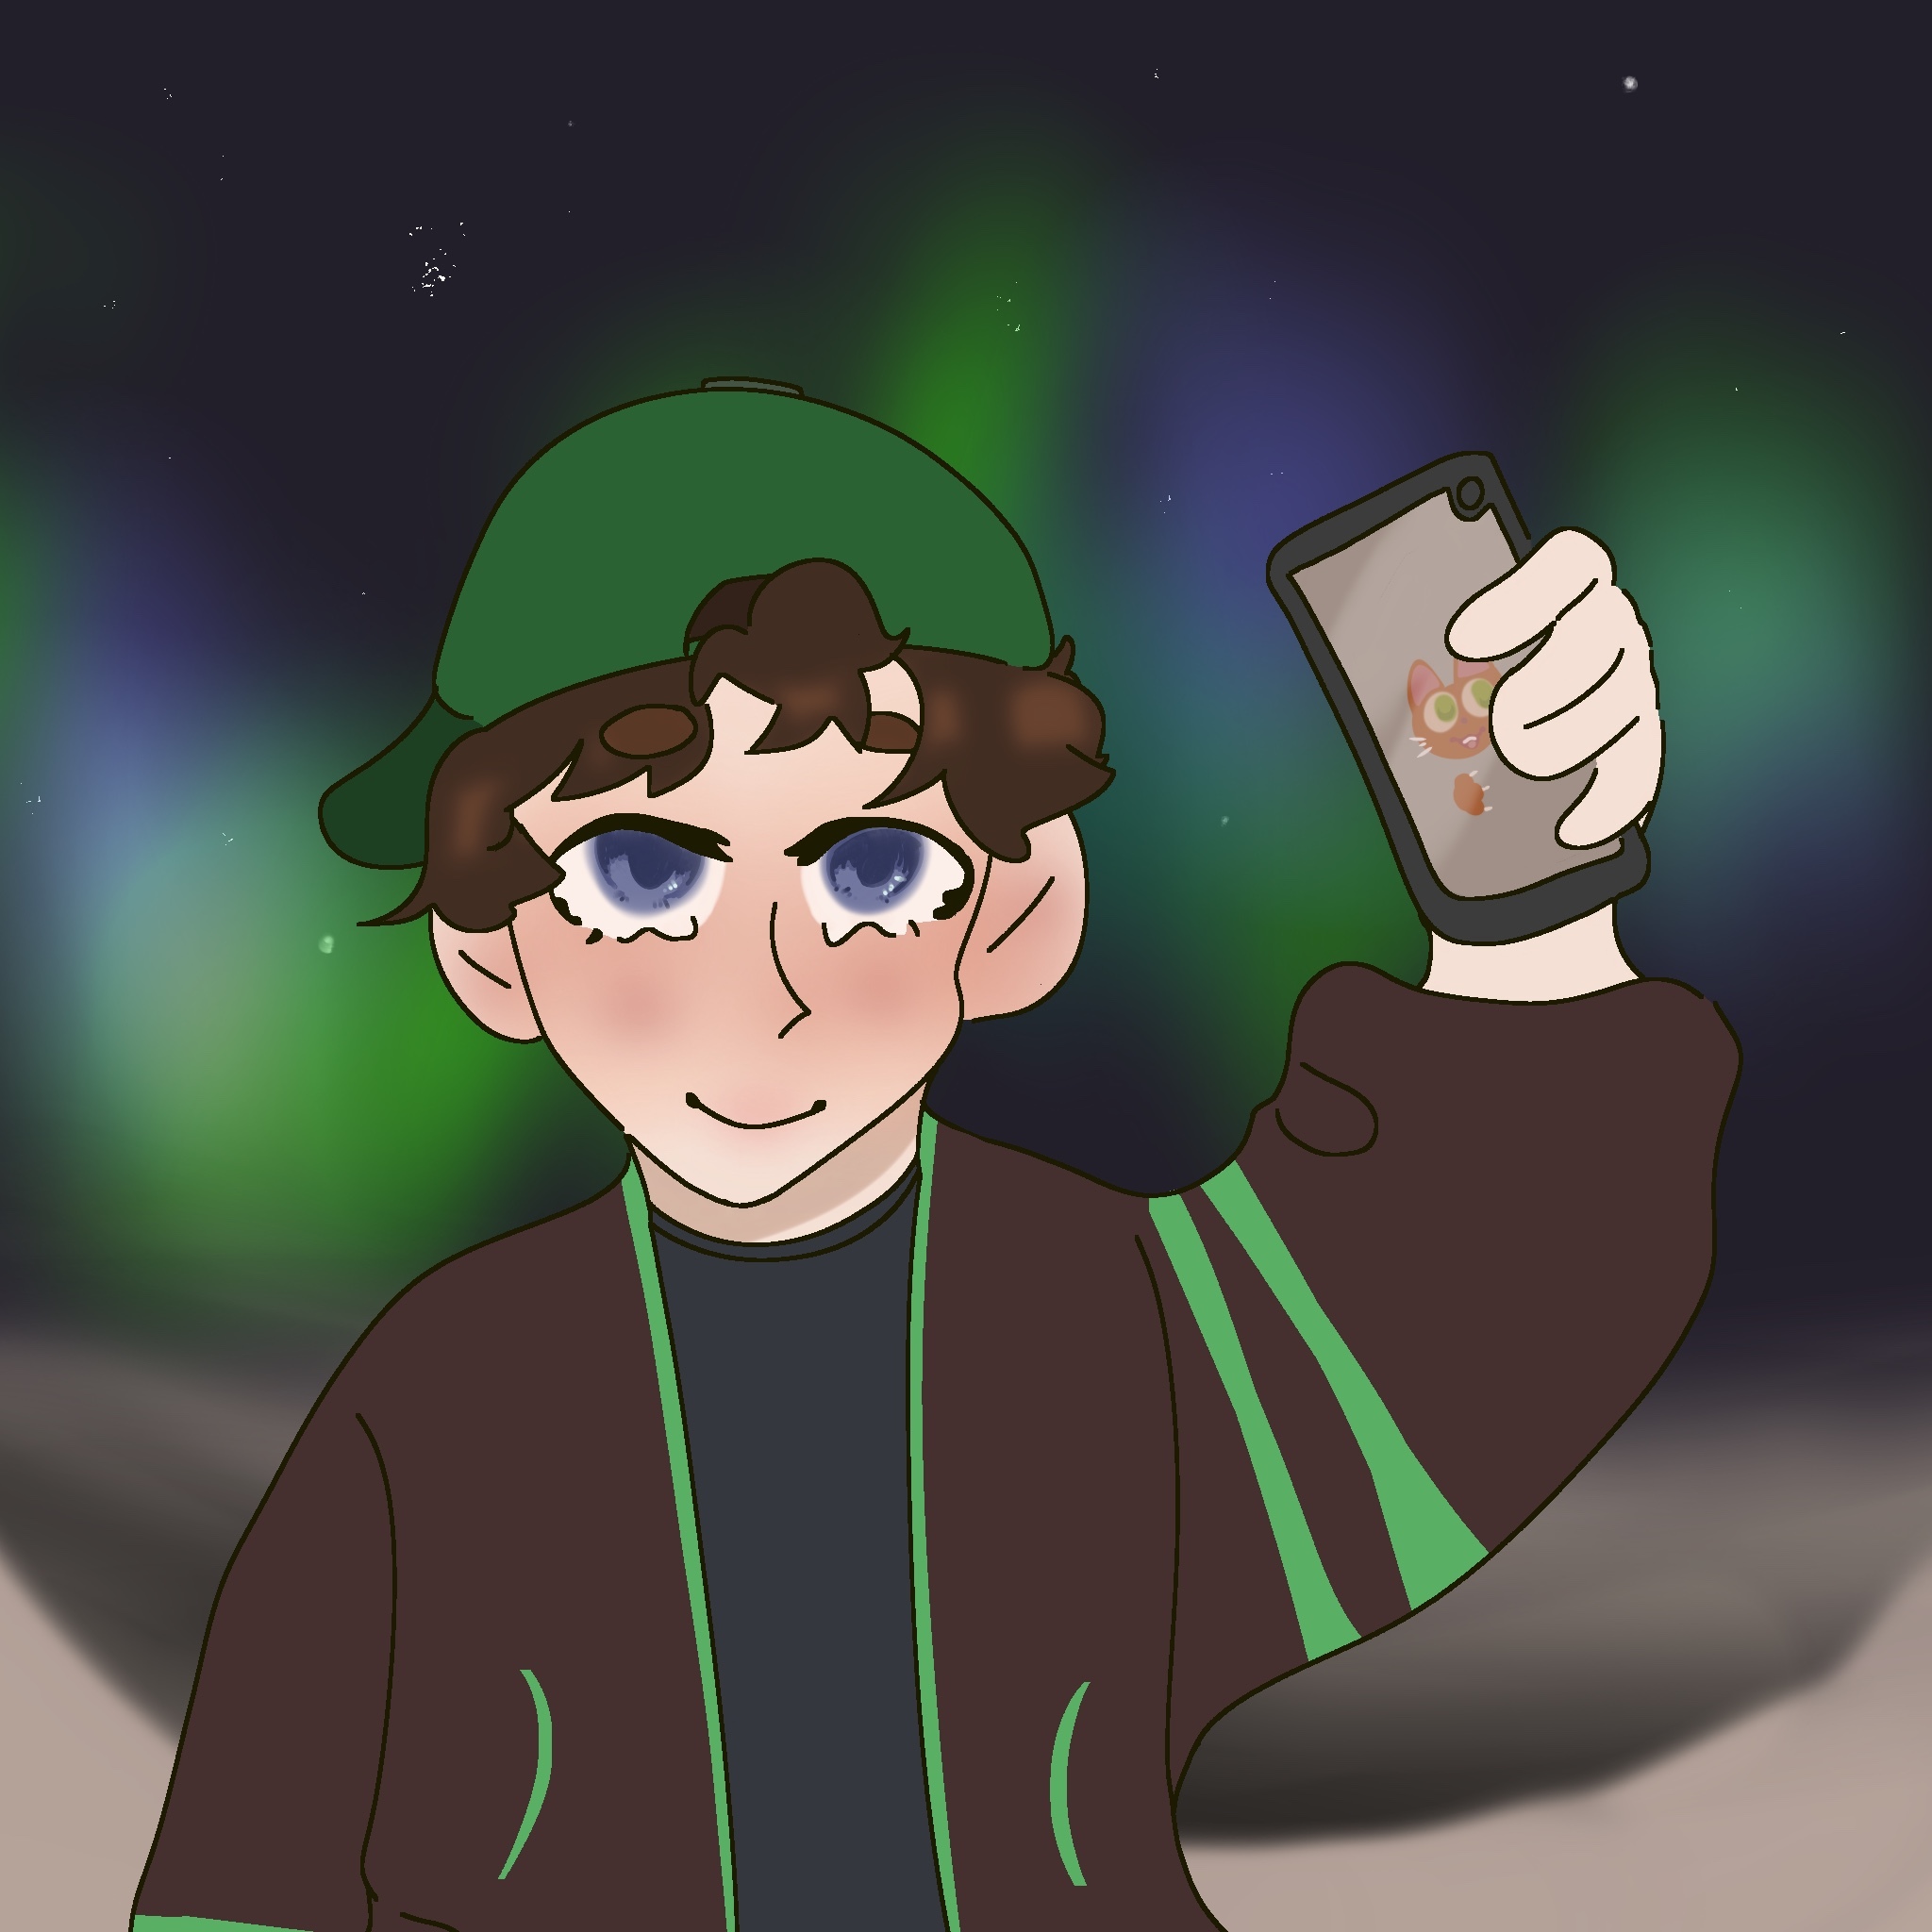 Image For Post | His rblx avatar holding a phone (before or after taking a selfie maybe) in front of the aurora boreal.